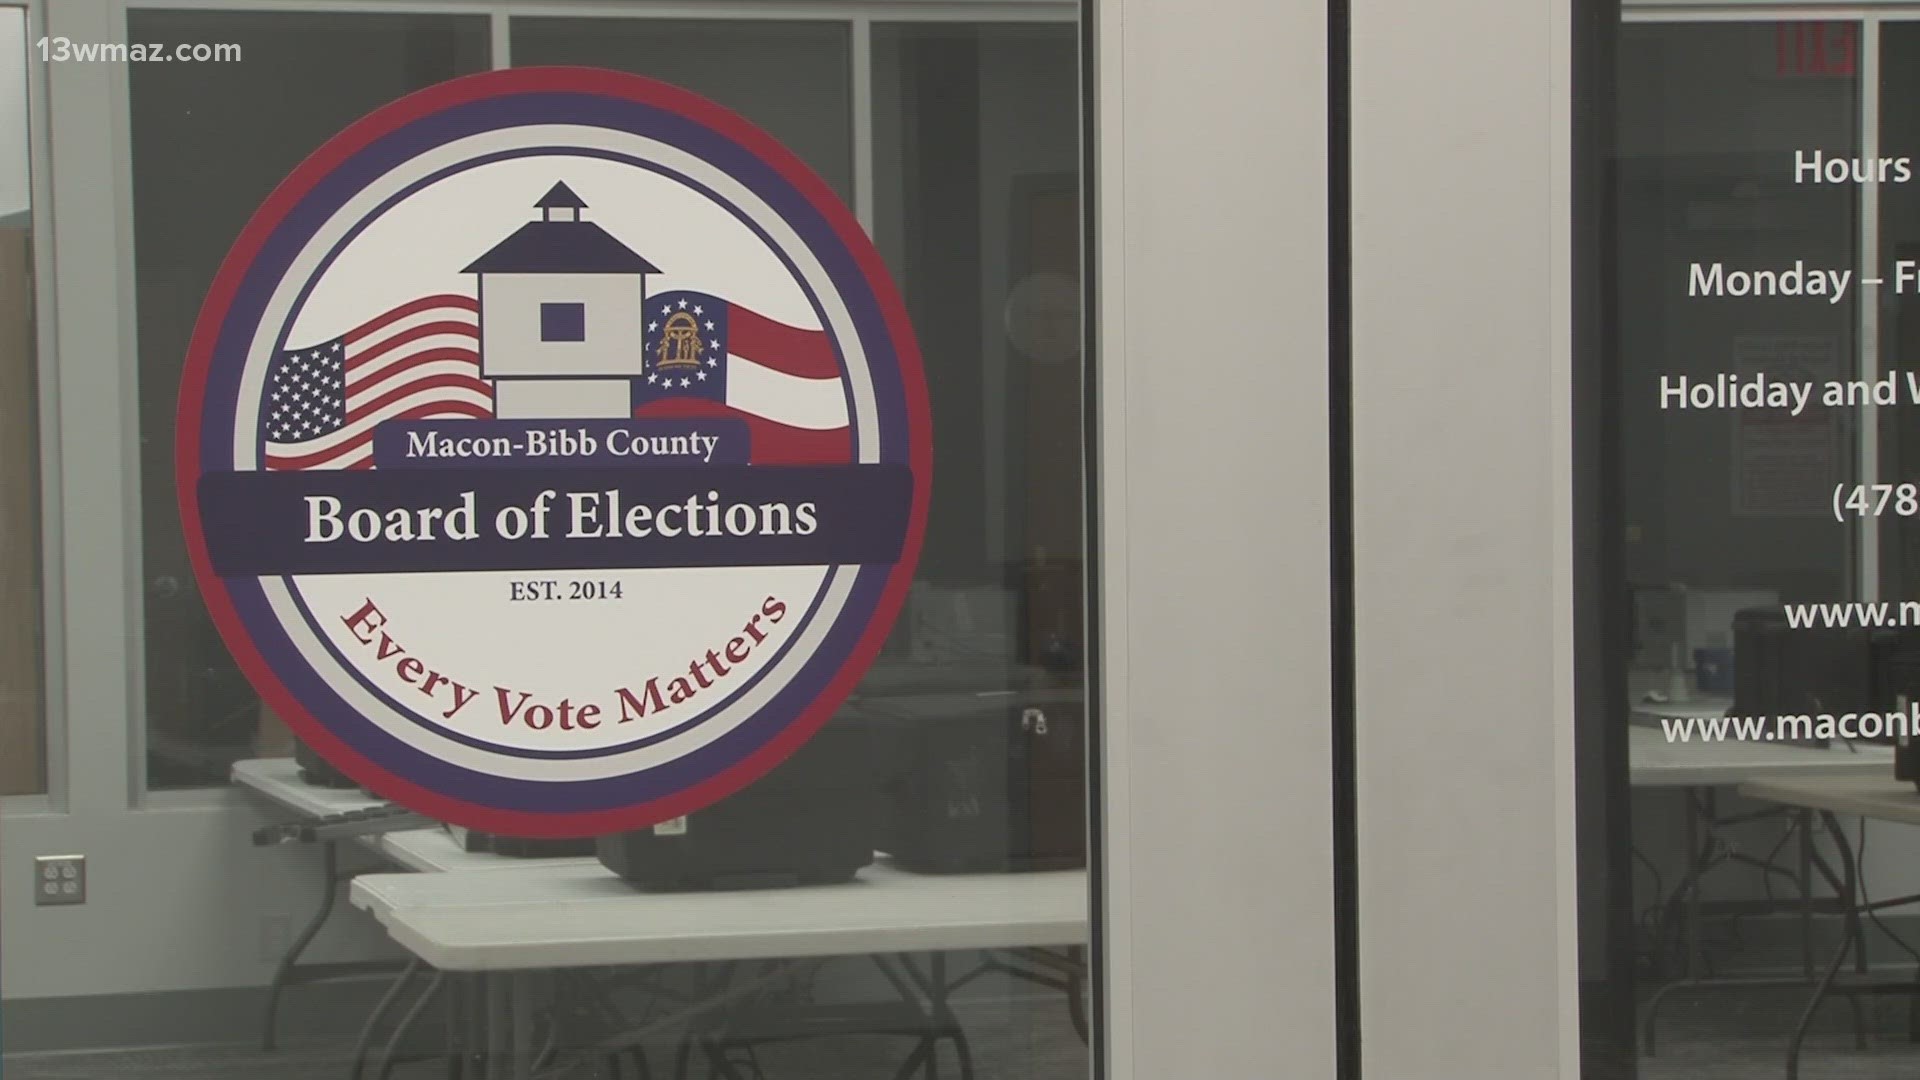 They've had a lot of changes ranging from moving locations to managing the county's voting rolls